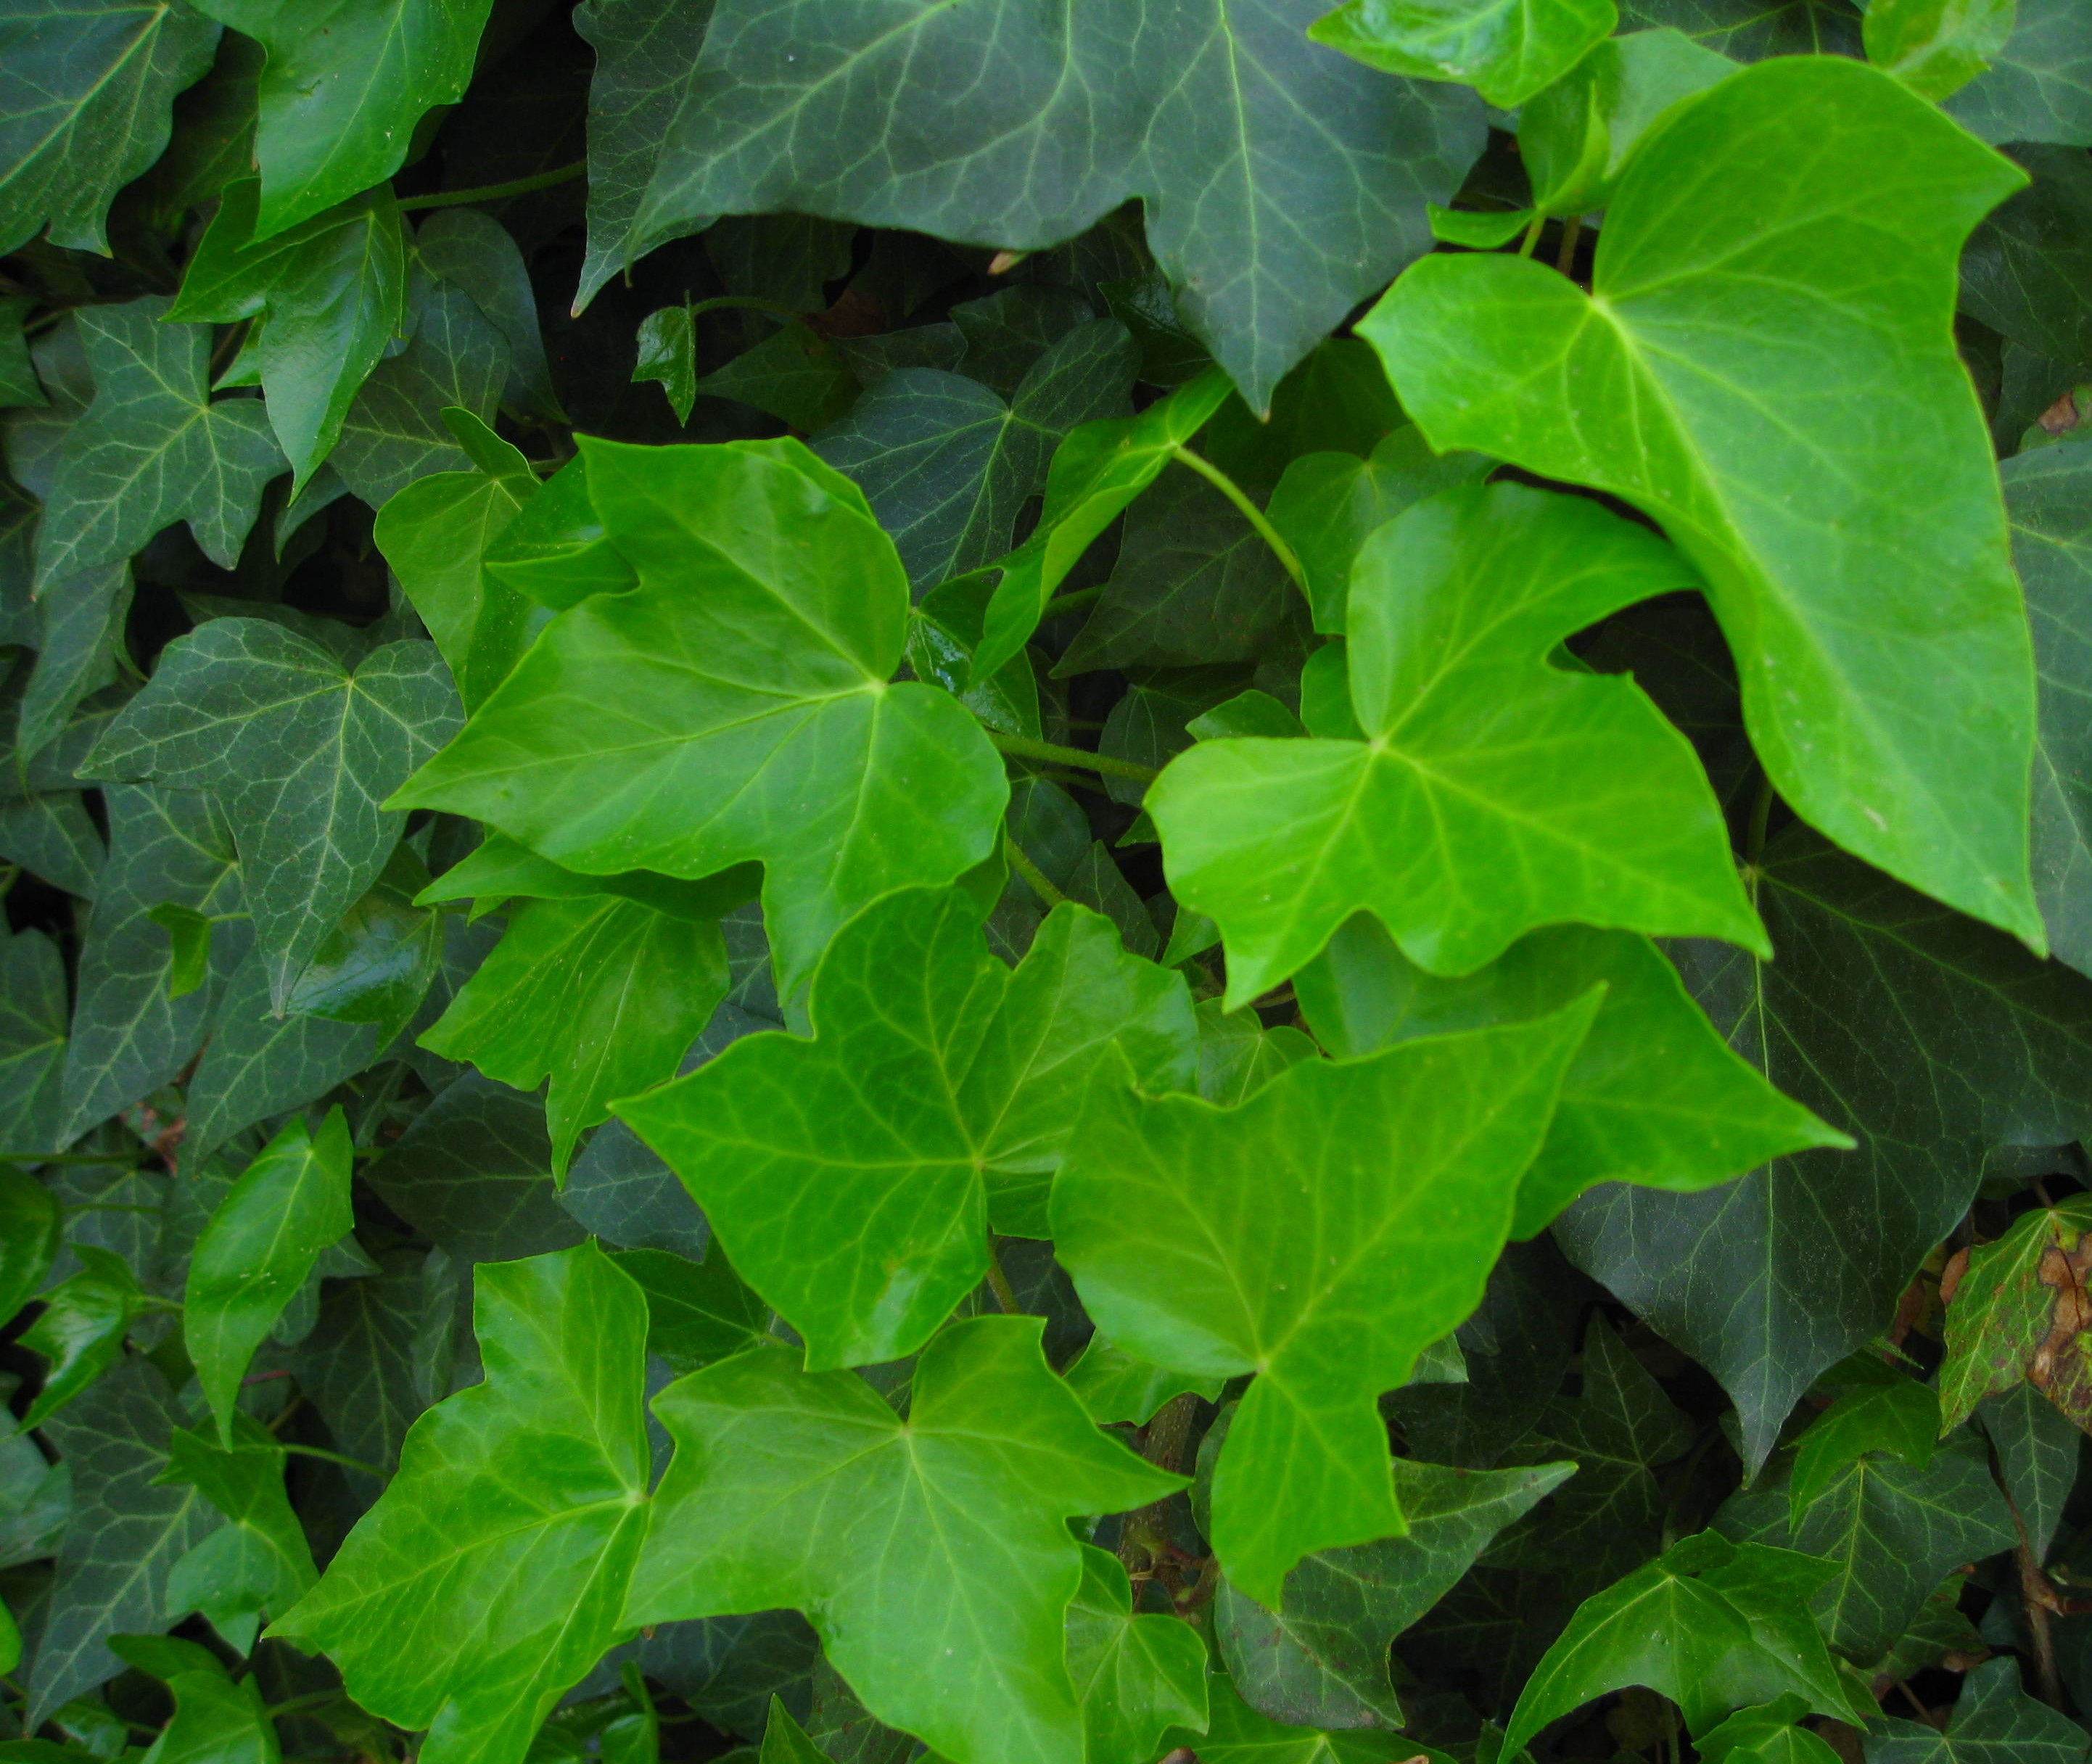 IVY LEAF EXTRACT